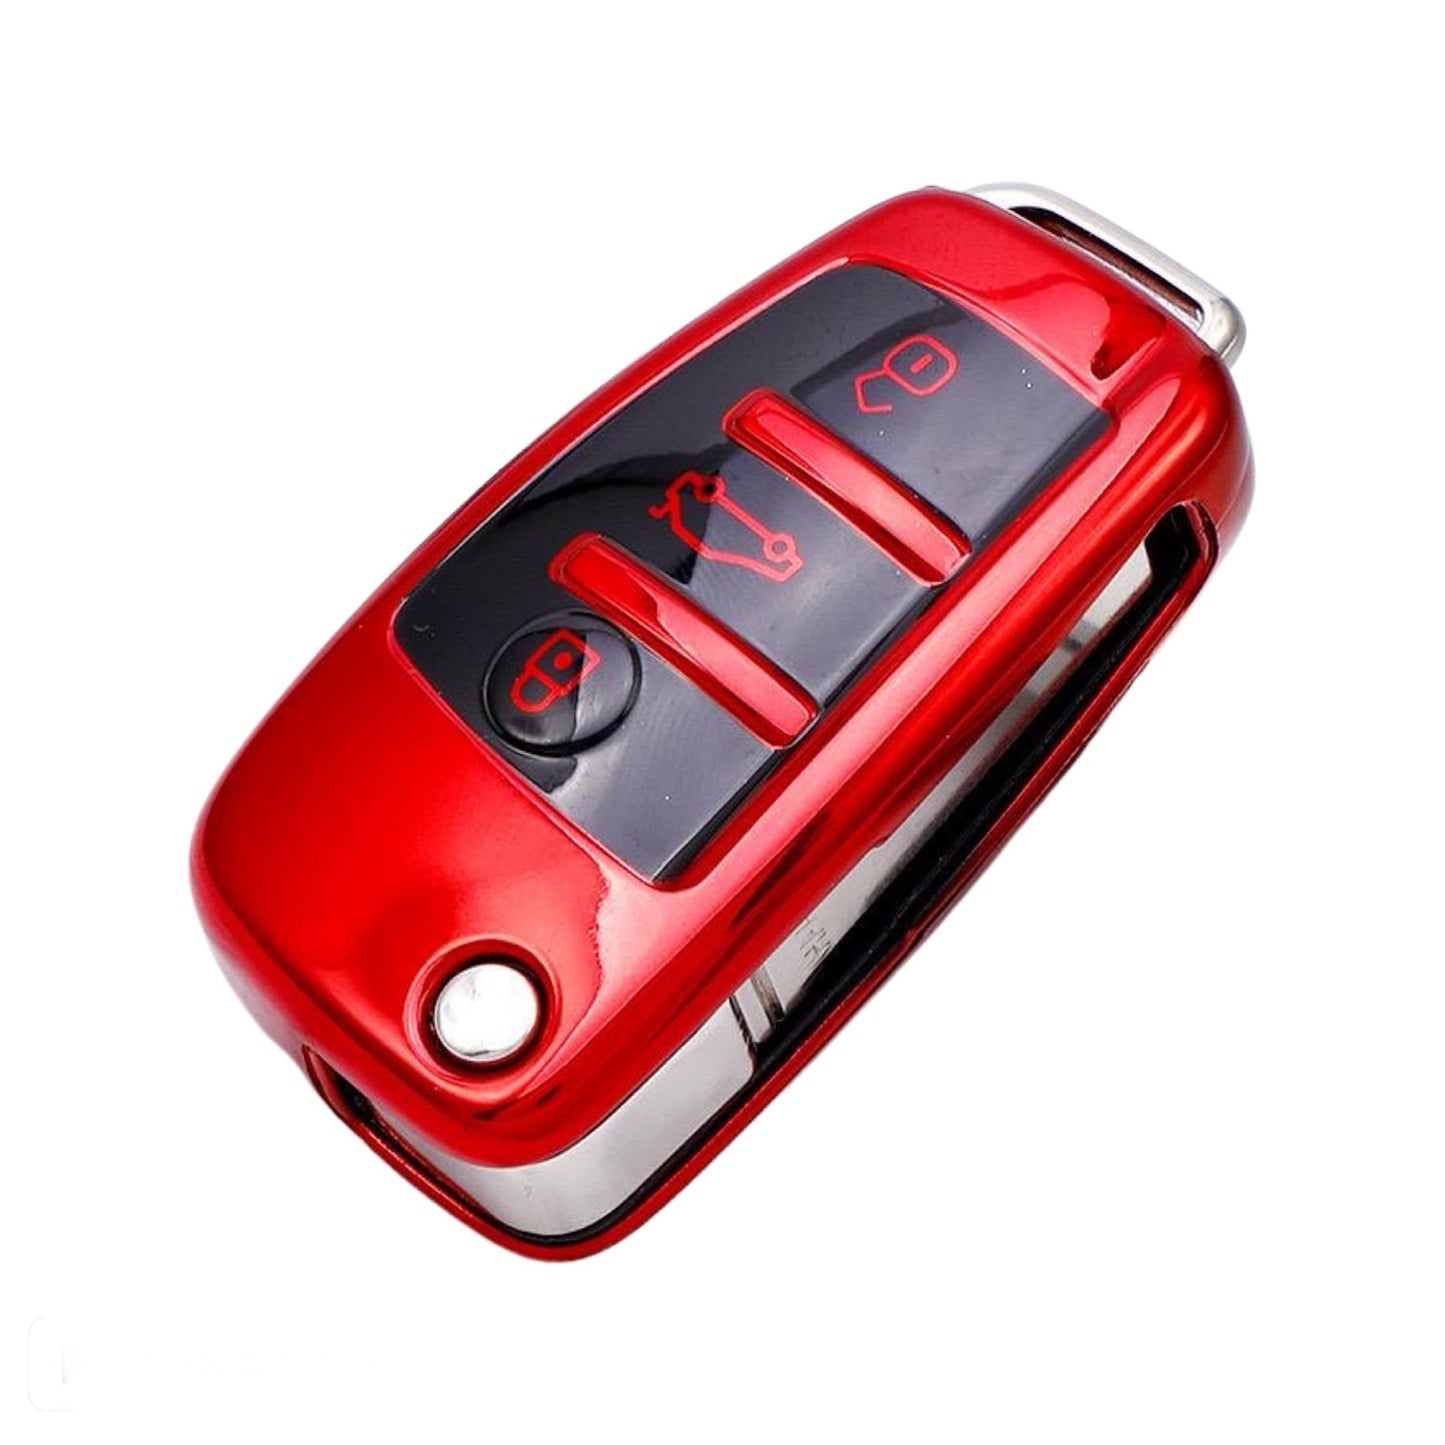 Audi key fob cover - Gloss Red | Keysleeves